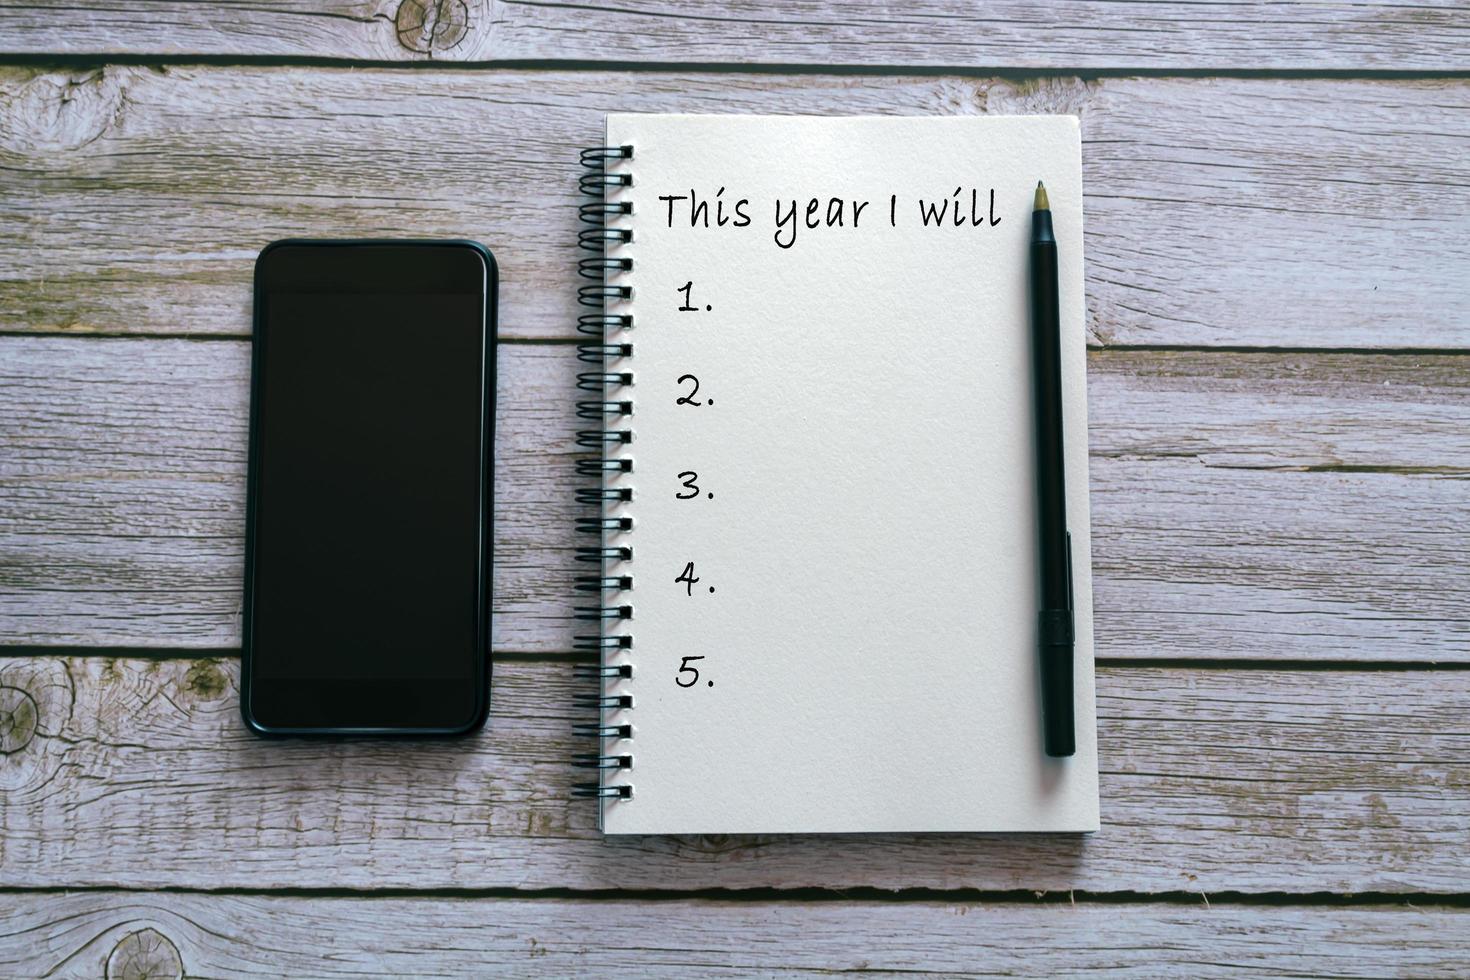 This year I will text on notepad on wooden background with smartphone and pen. photo